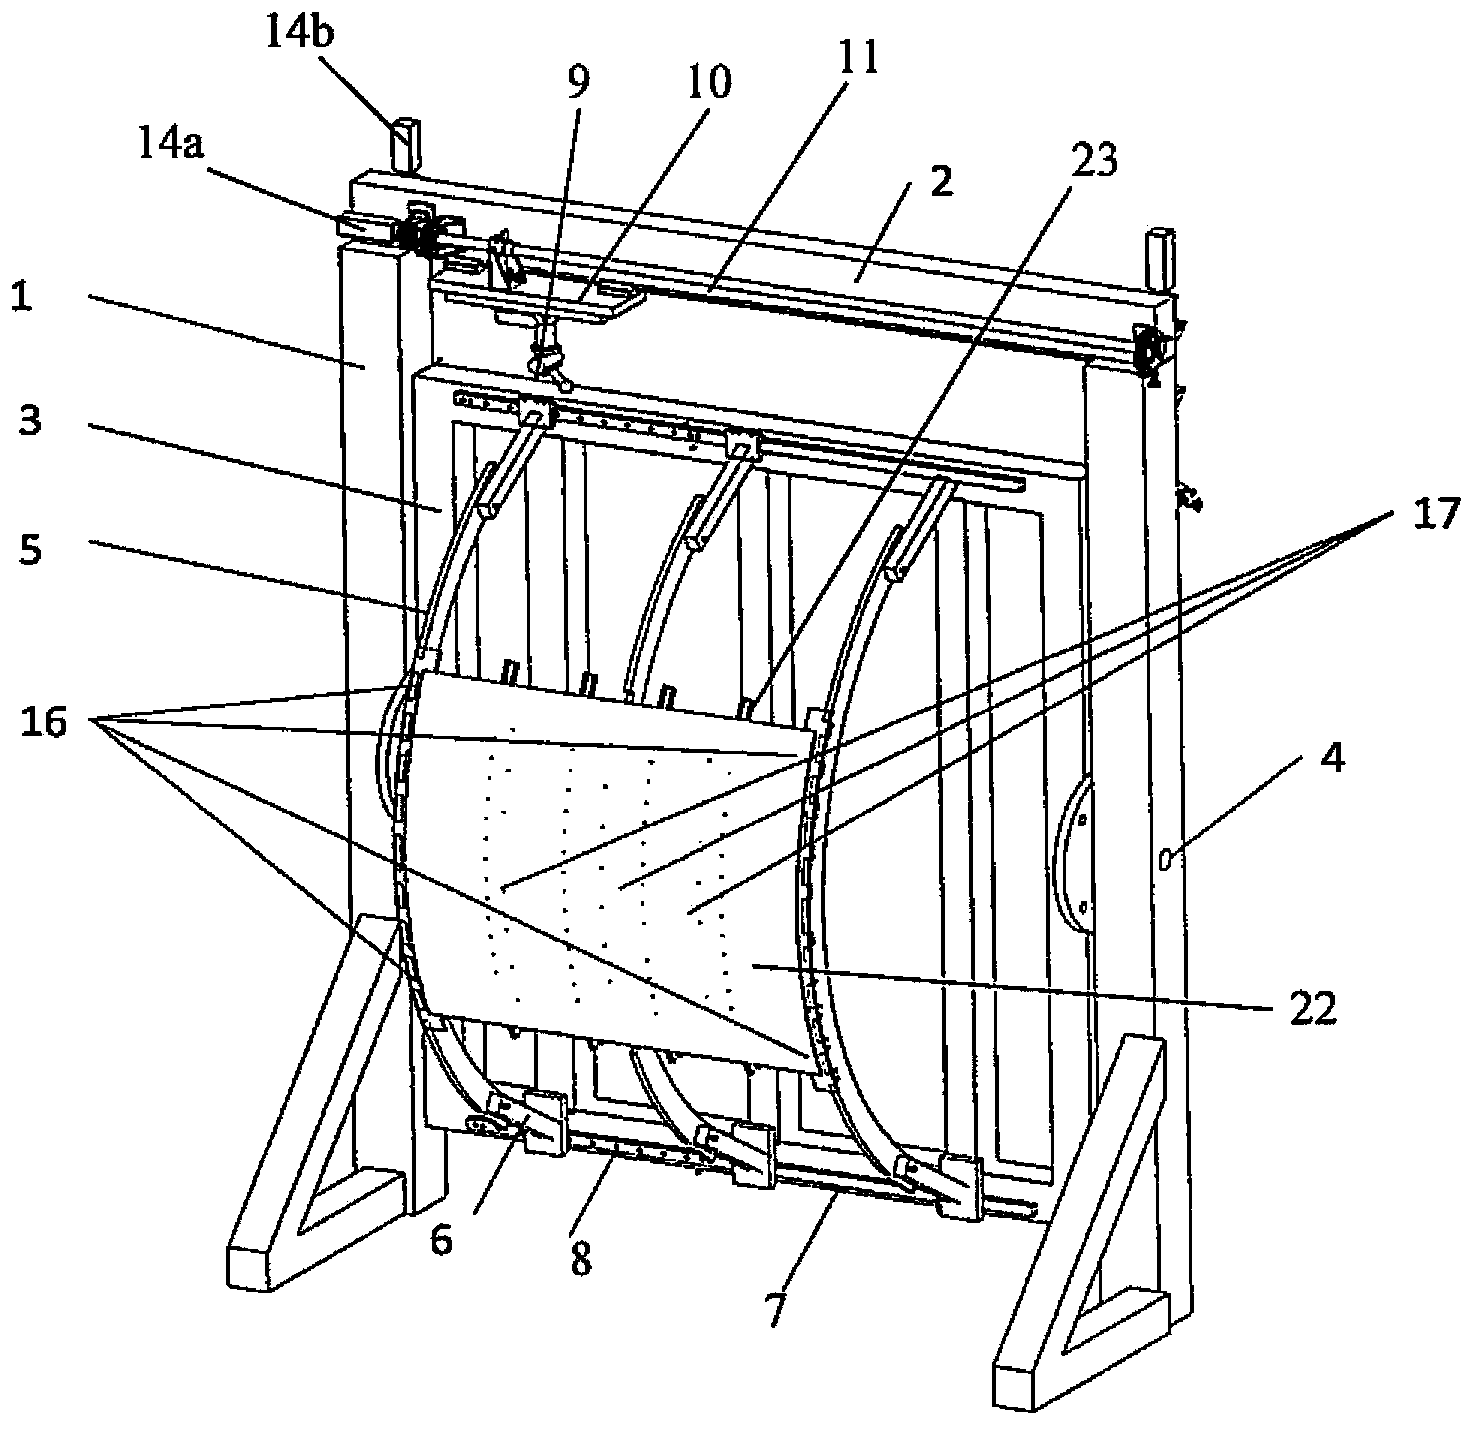 Flexible measurement and control tool system and flexible measurement and control method for large wall panels with complicated surfaces